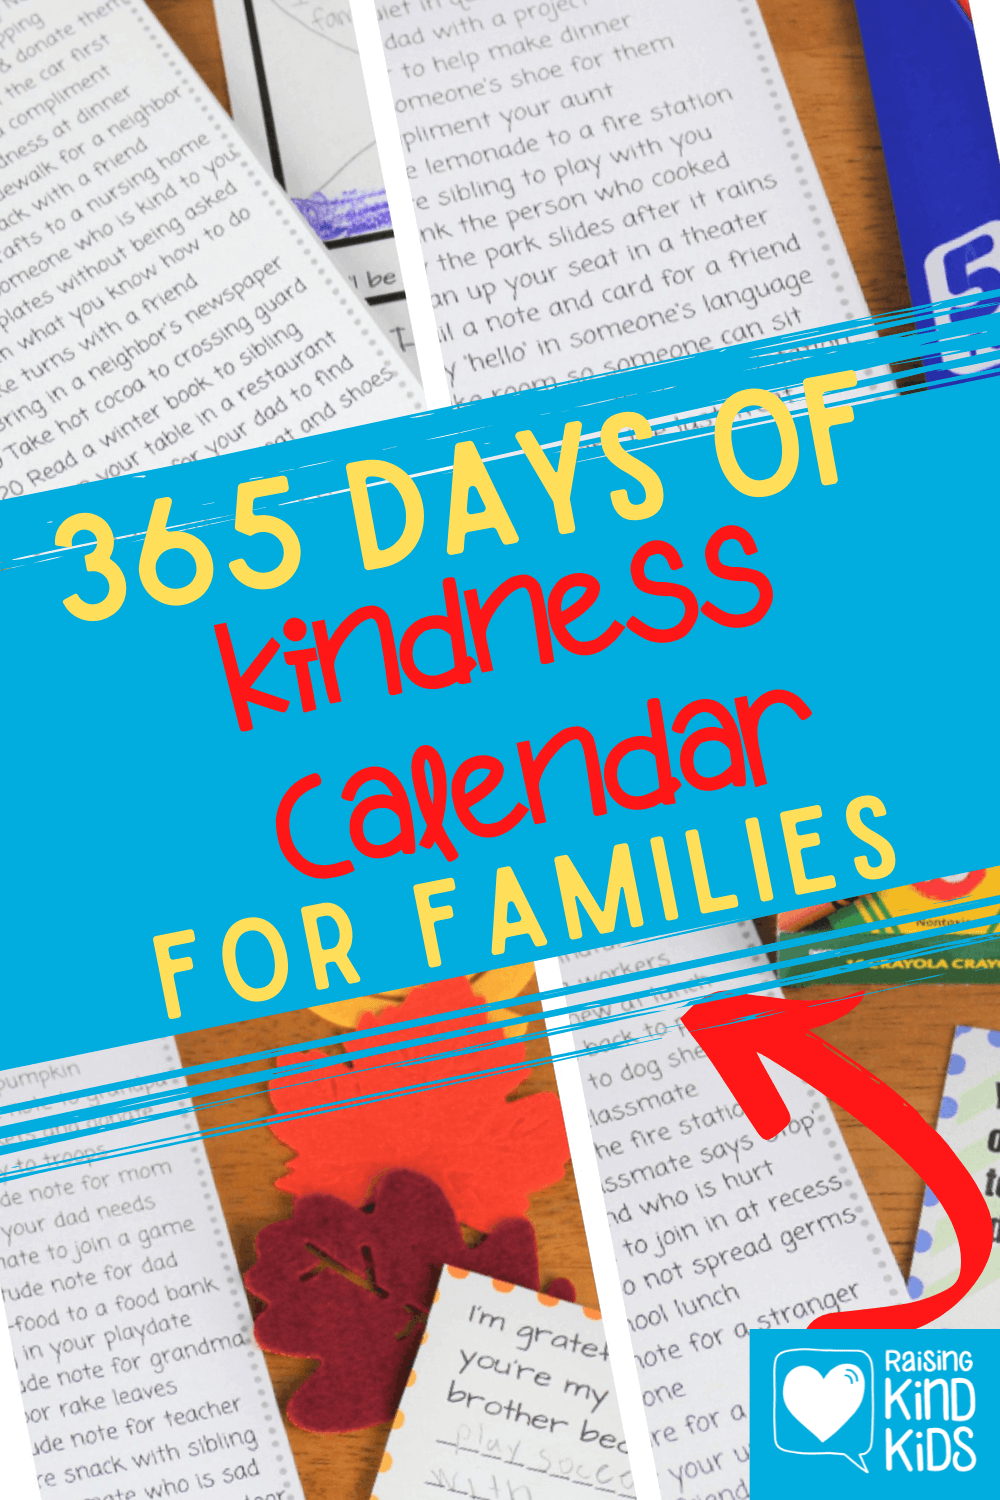 365 days of kid-friendly kindness activities to do with your family in an easy to use, reusable family kindness calendar because kindness matters. These kindness activities for kids are easy to do with this reminder. #kindnessactivities #kindnesscalendar #365daysofkindness #kindness #kindkids #raisingkindkids #kindnessactivitiesforkids #coffeeandcarpool